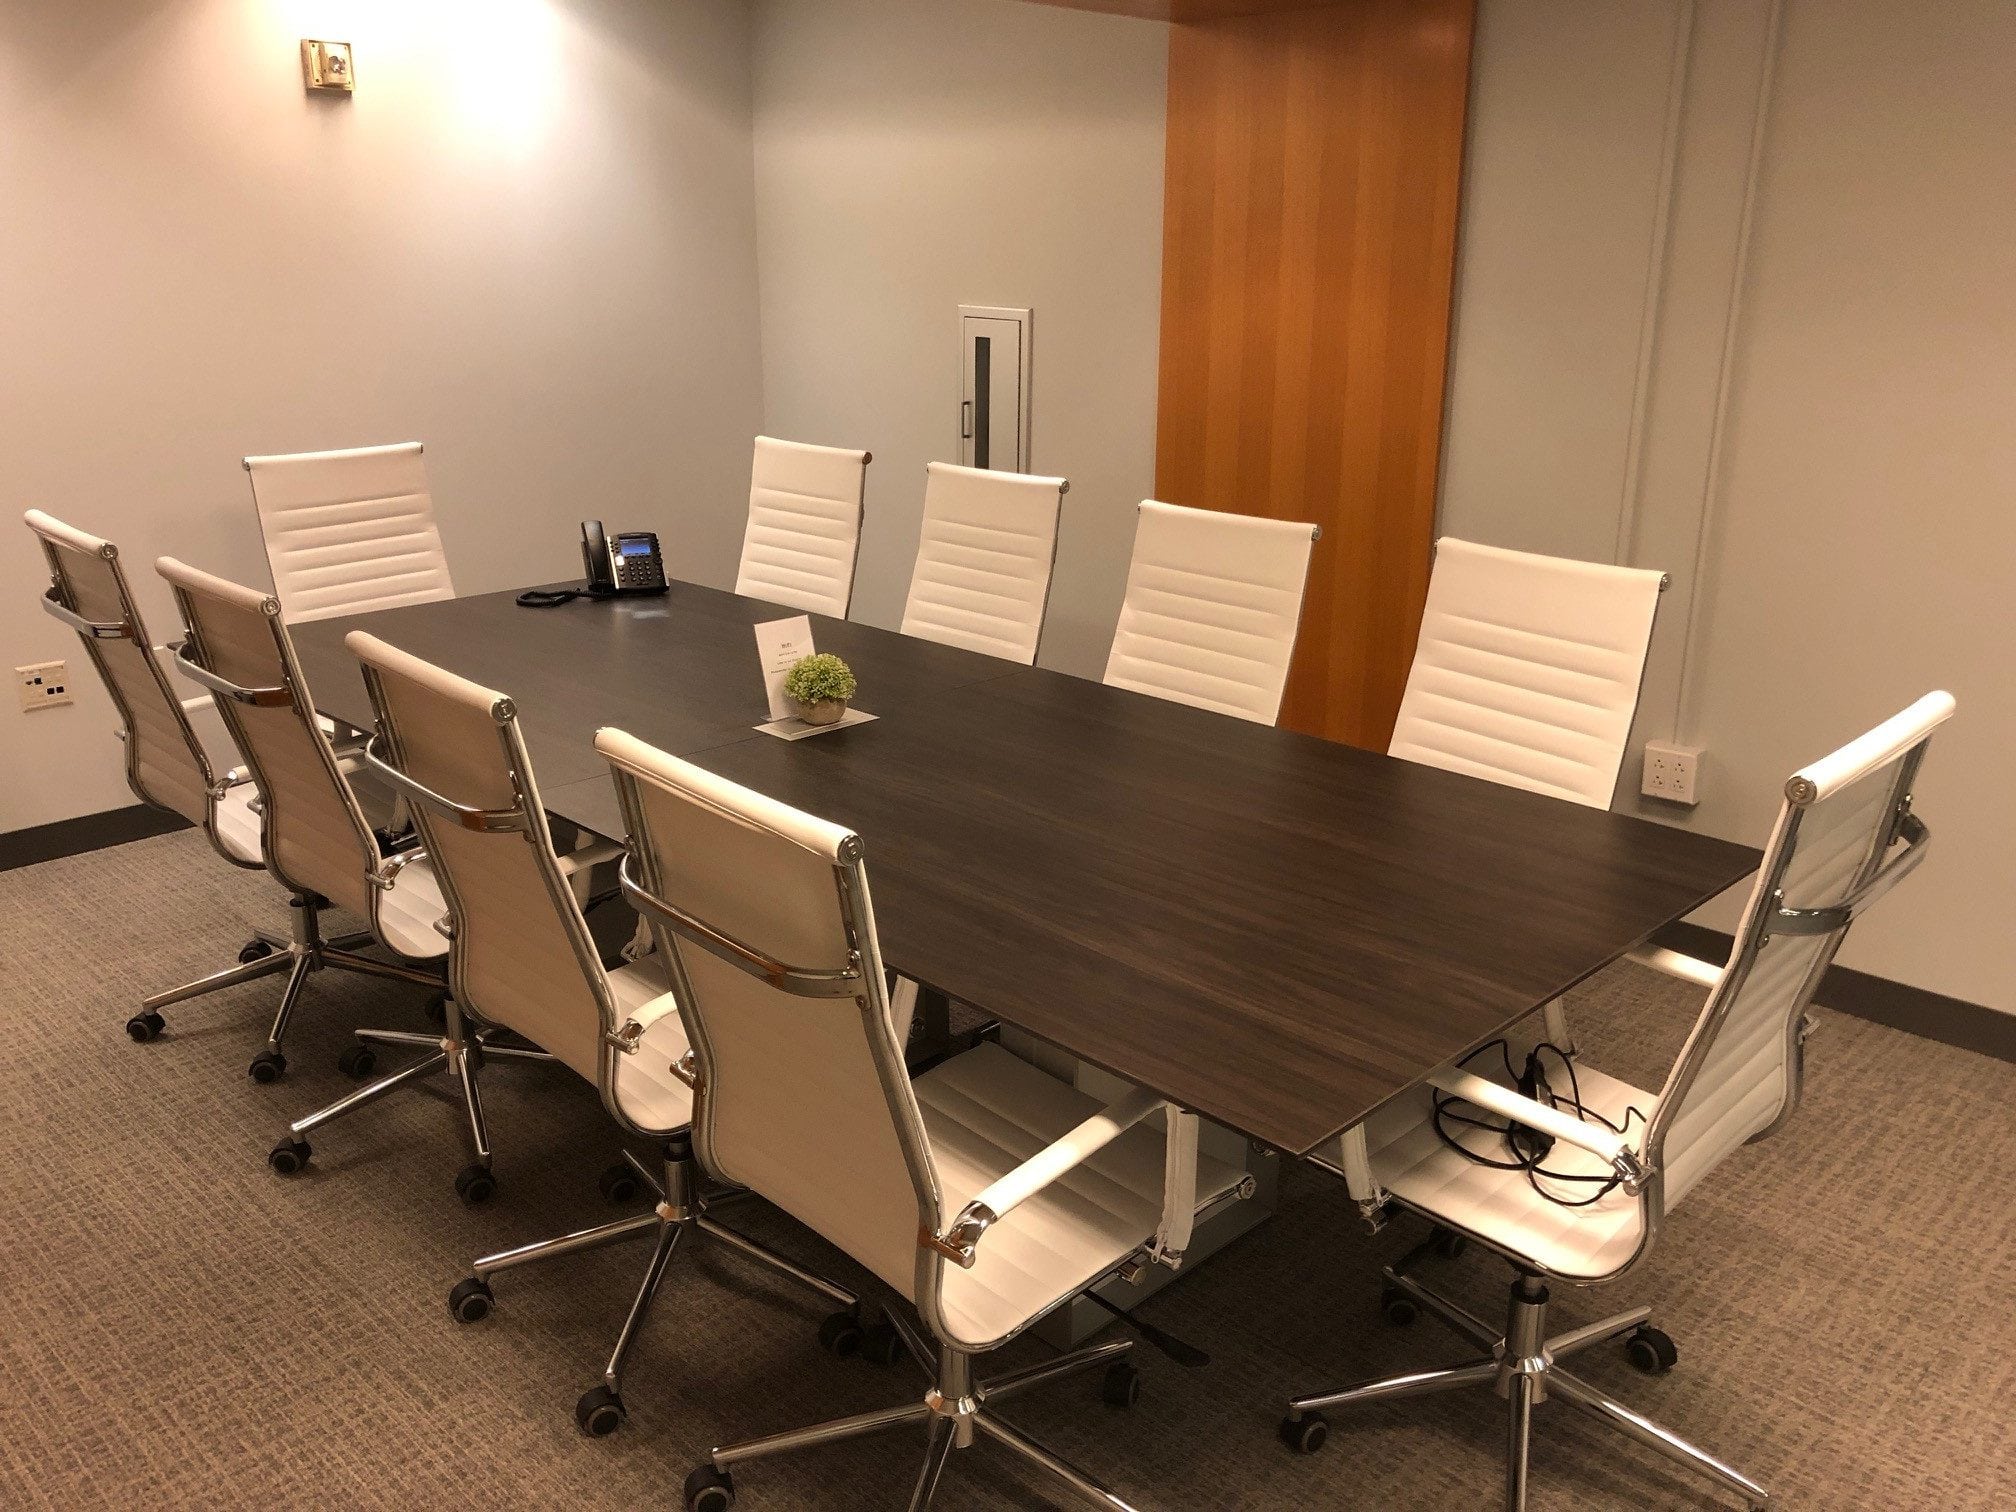 New York Conference Meeting Room Rental Nyc Office Suites